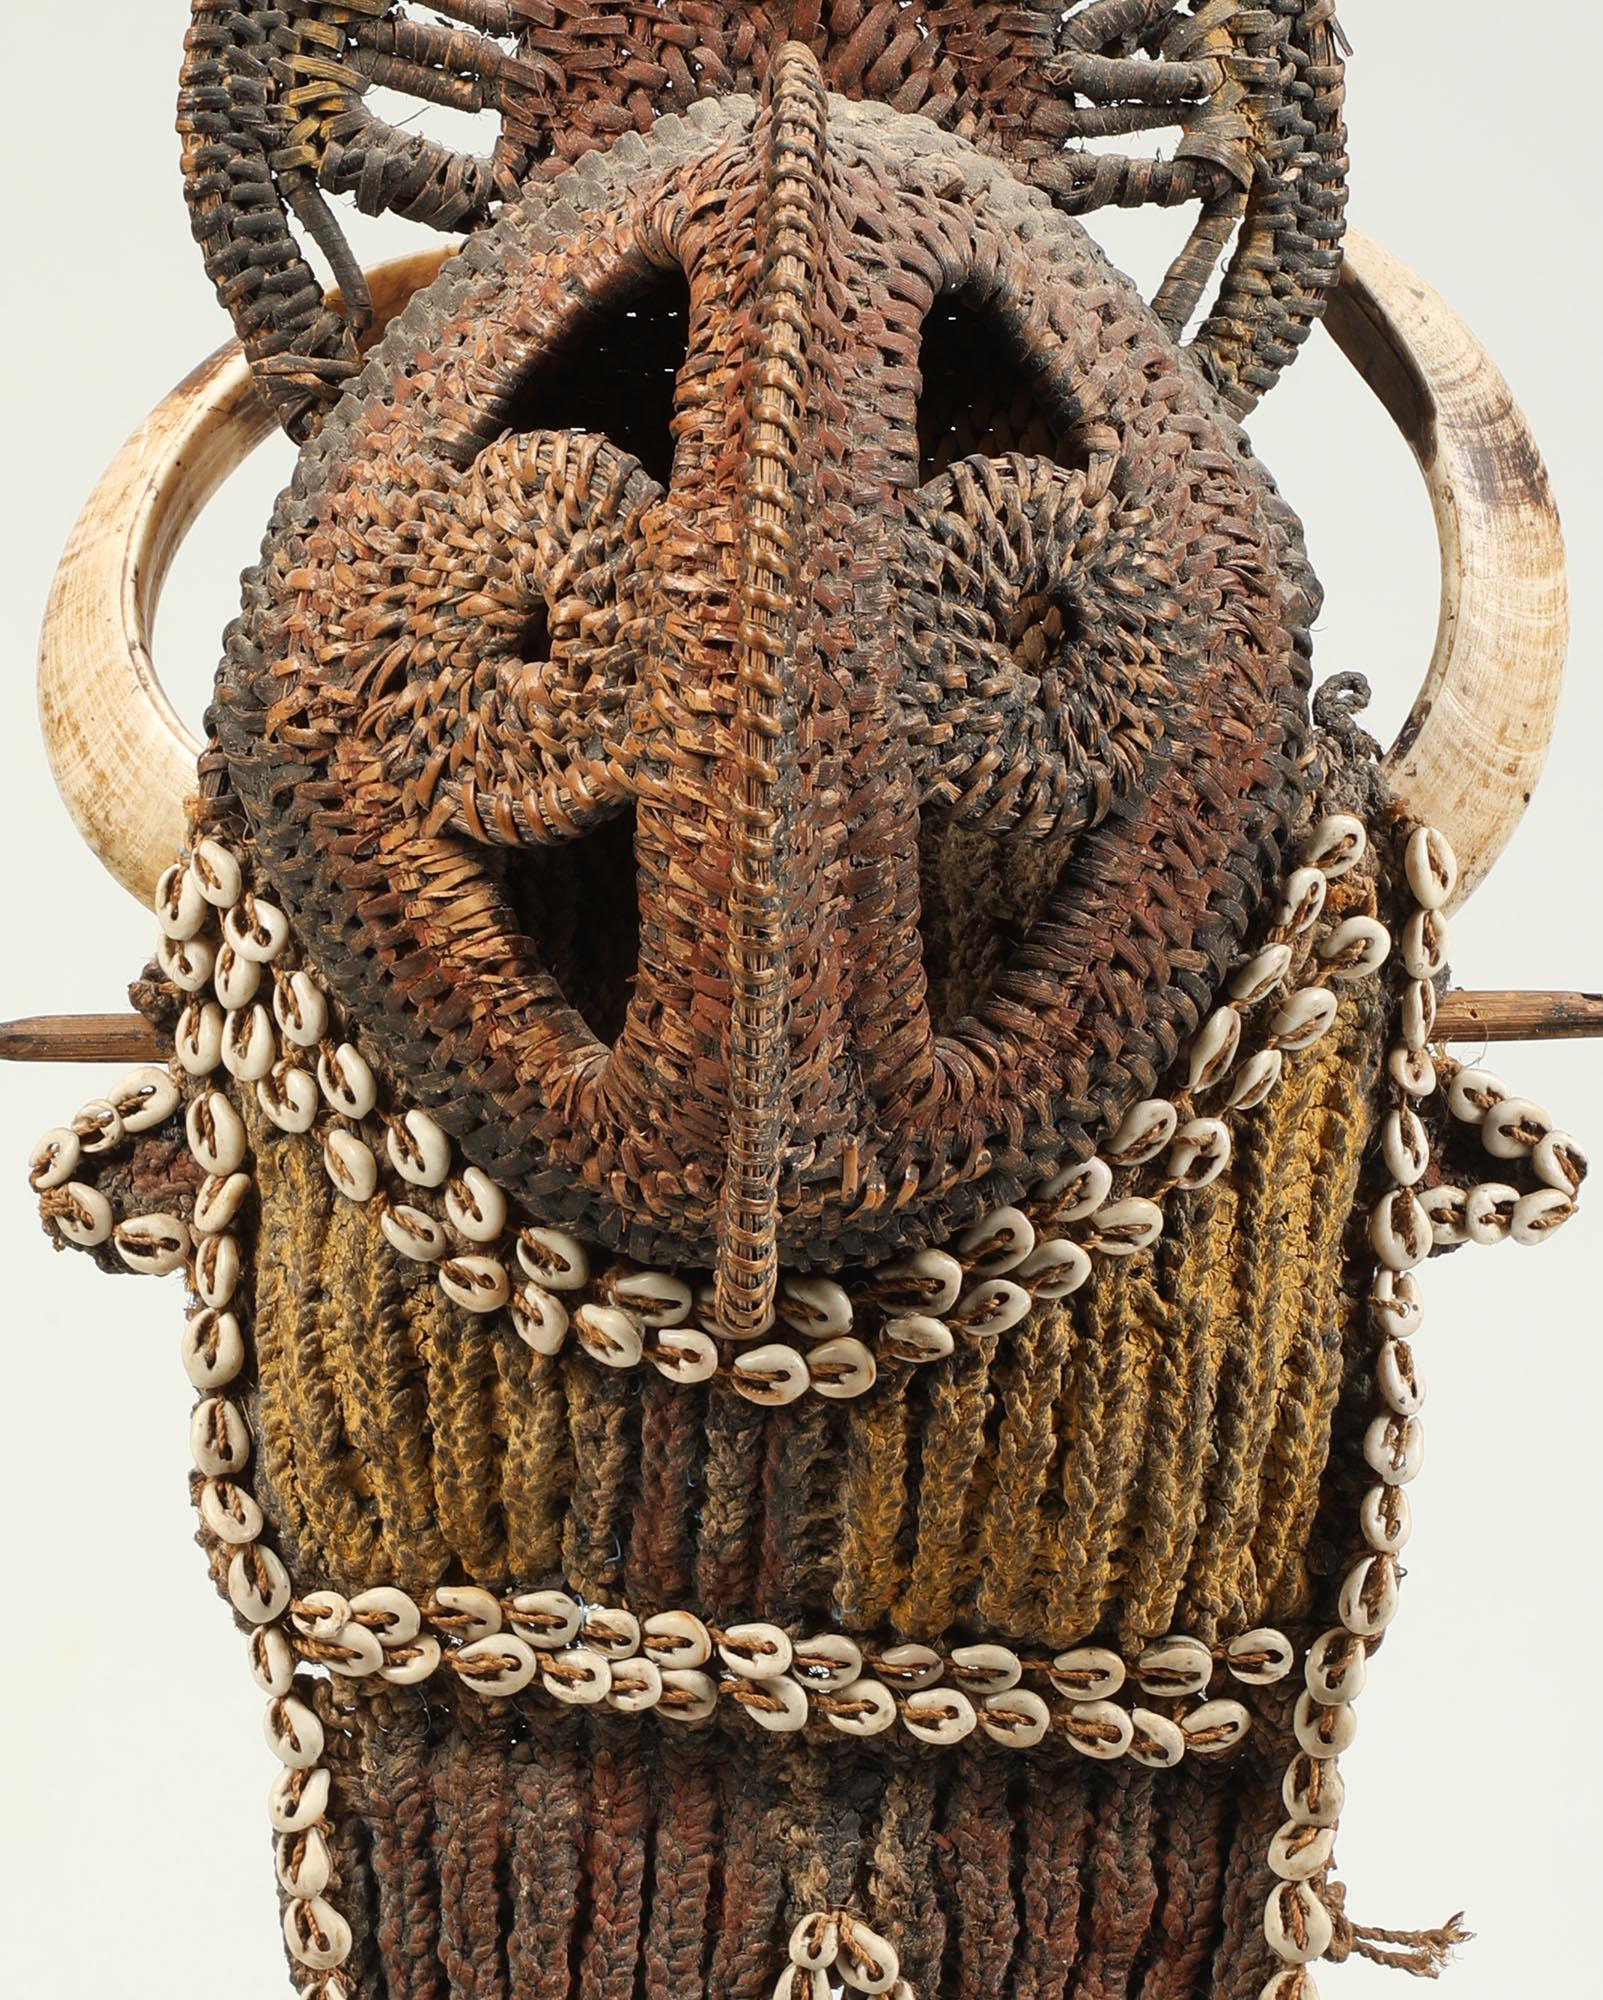 Woven basketry figural pectoral chest ornament with from Papua New Guinea. Woven yam mask style face with traces of red, black and yellow pigments, rings of attached cowrie shells and tusks.
On custom metal and wood base.
18 3/4 inches high, total